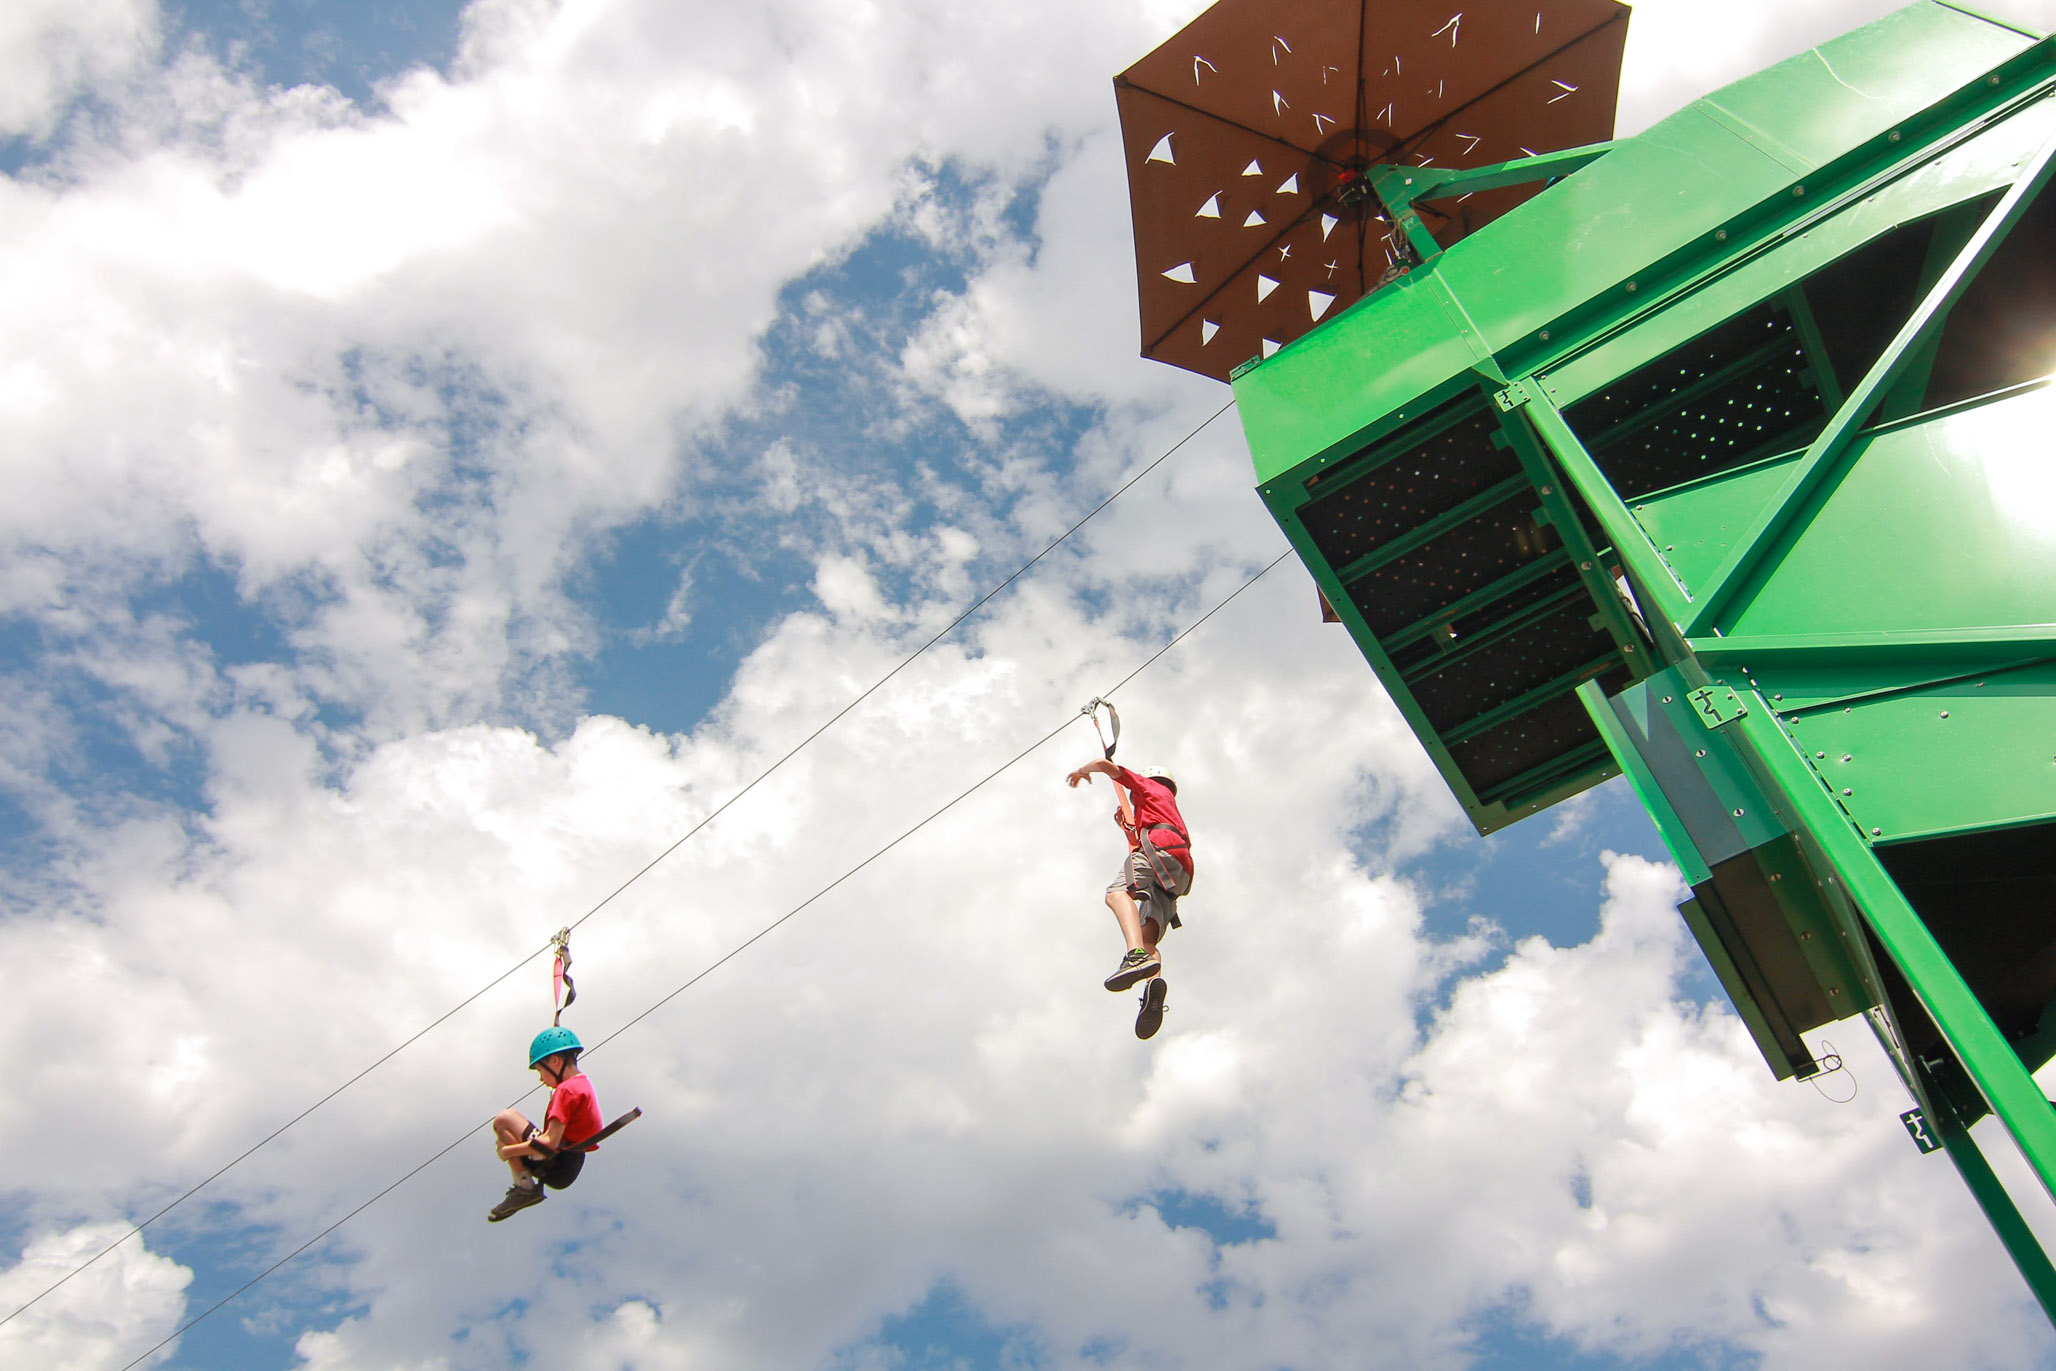 two kids riding down a zipline from a green tower.